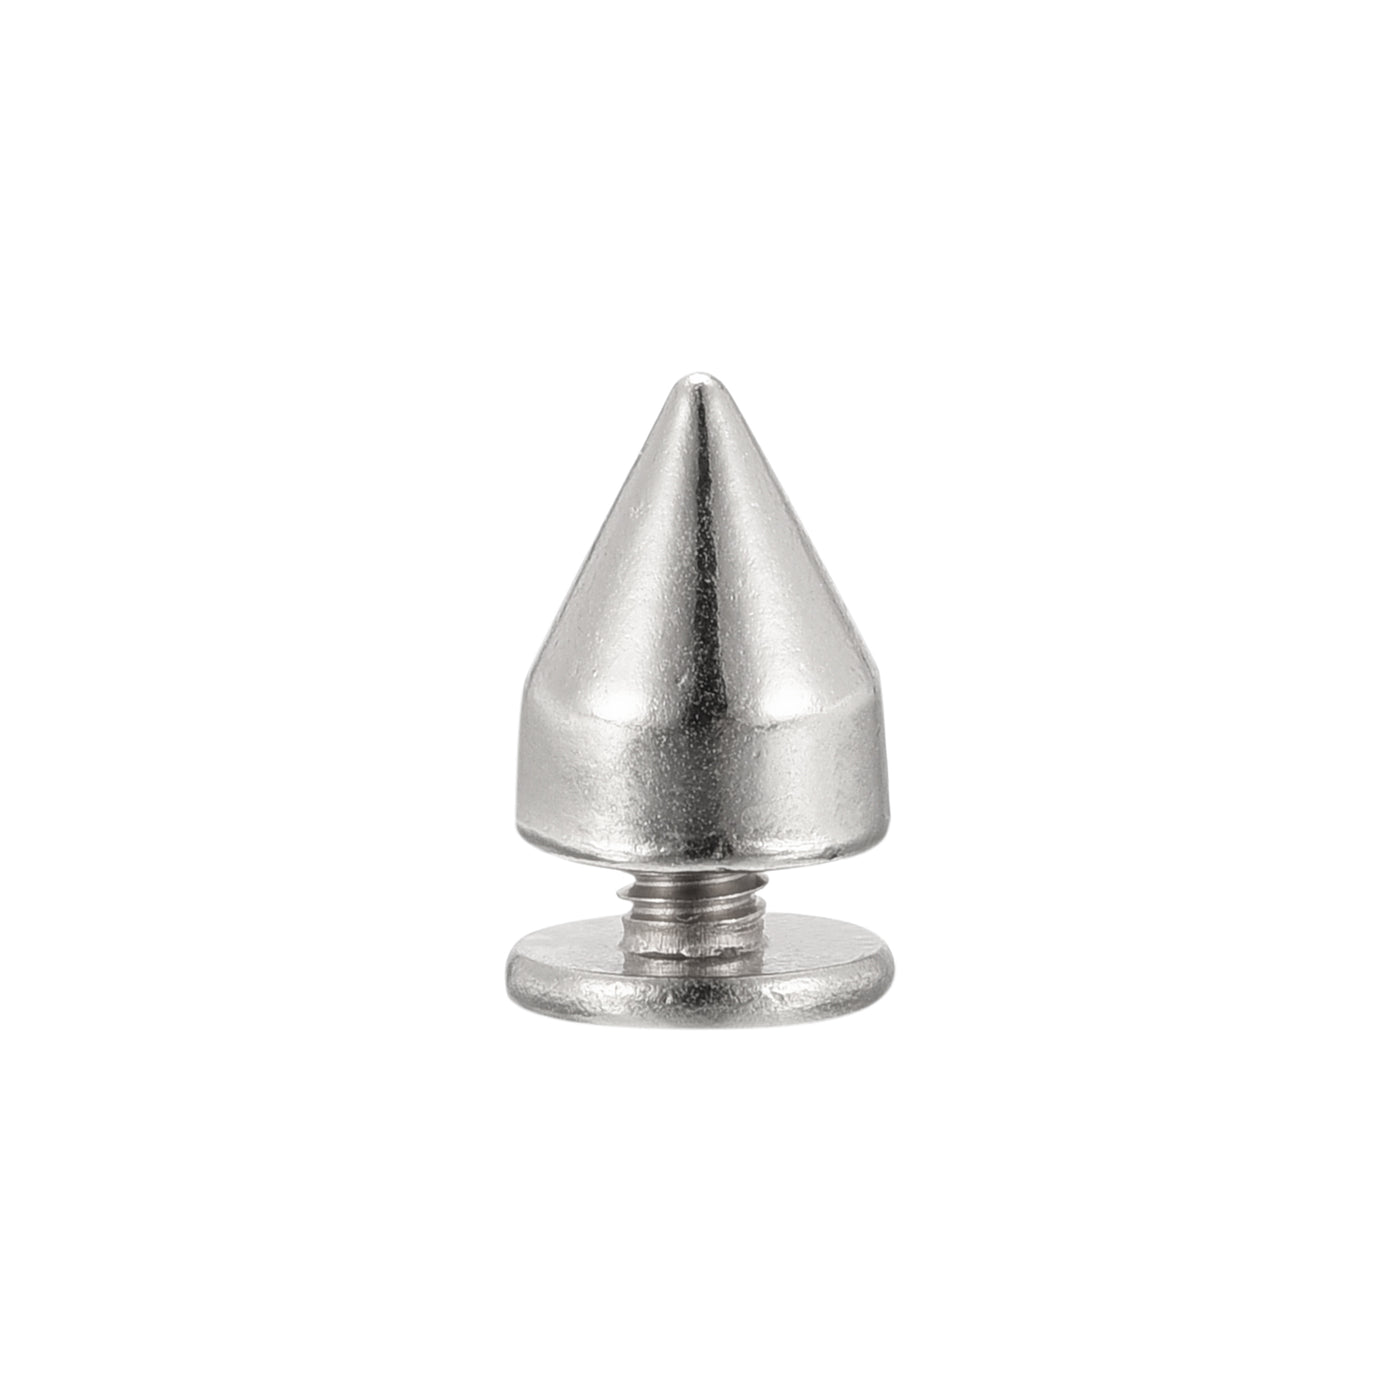 Uxcell Uxcell 7x8.5mm Screw Back Stud Rivets Spikes Zinc Alloy for DIY Silver Tone 30 Sets